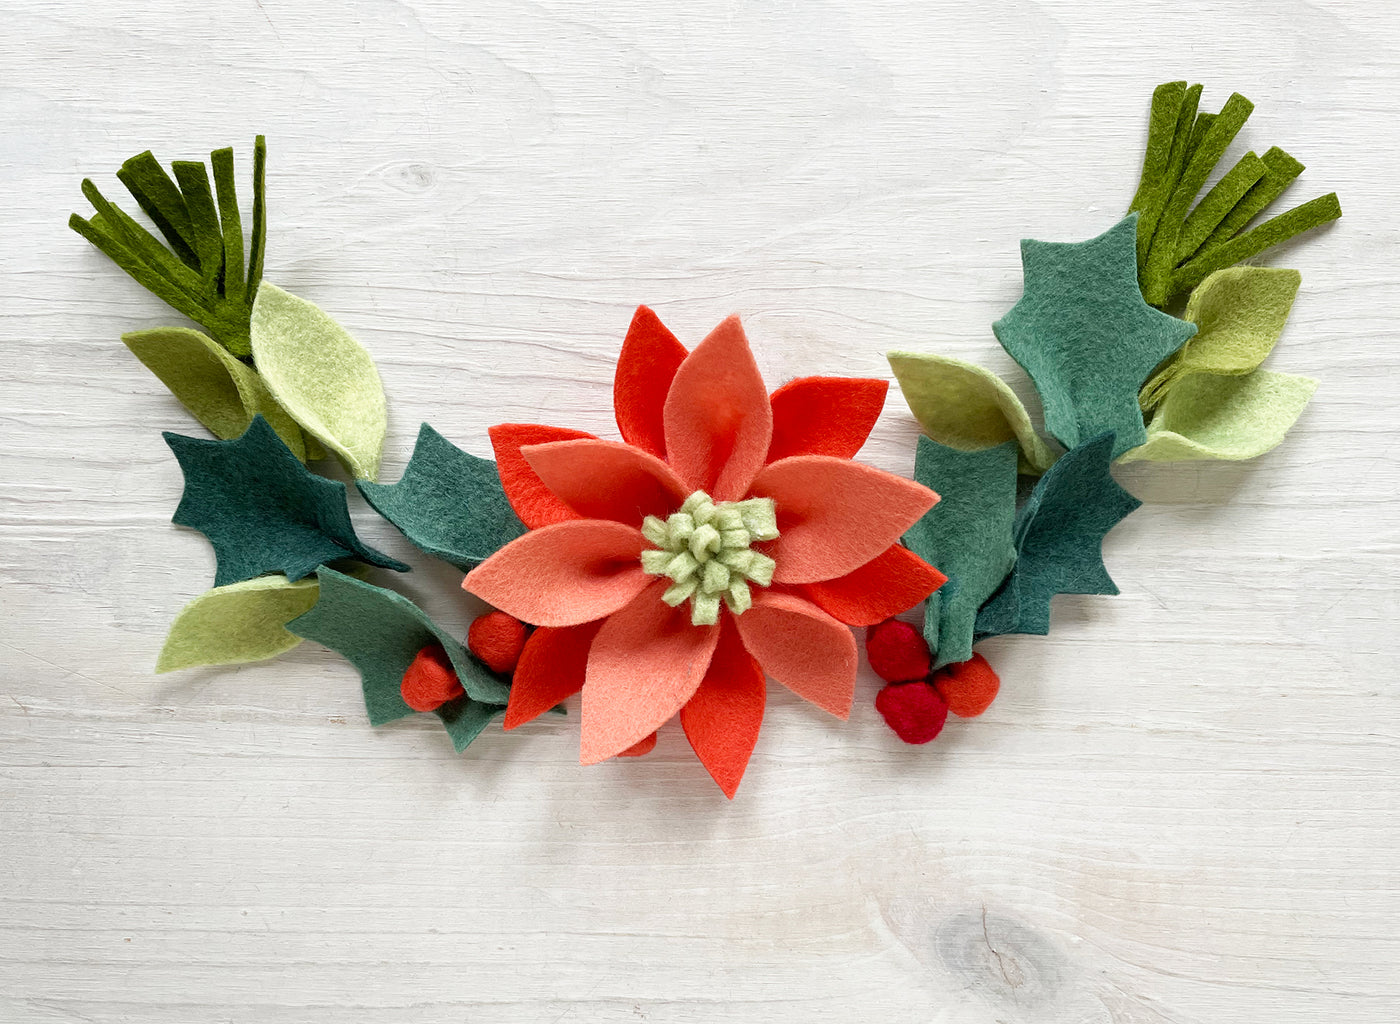 Winter Greenery Pattern for Christmas wreath, garland, ornaments and more